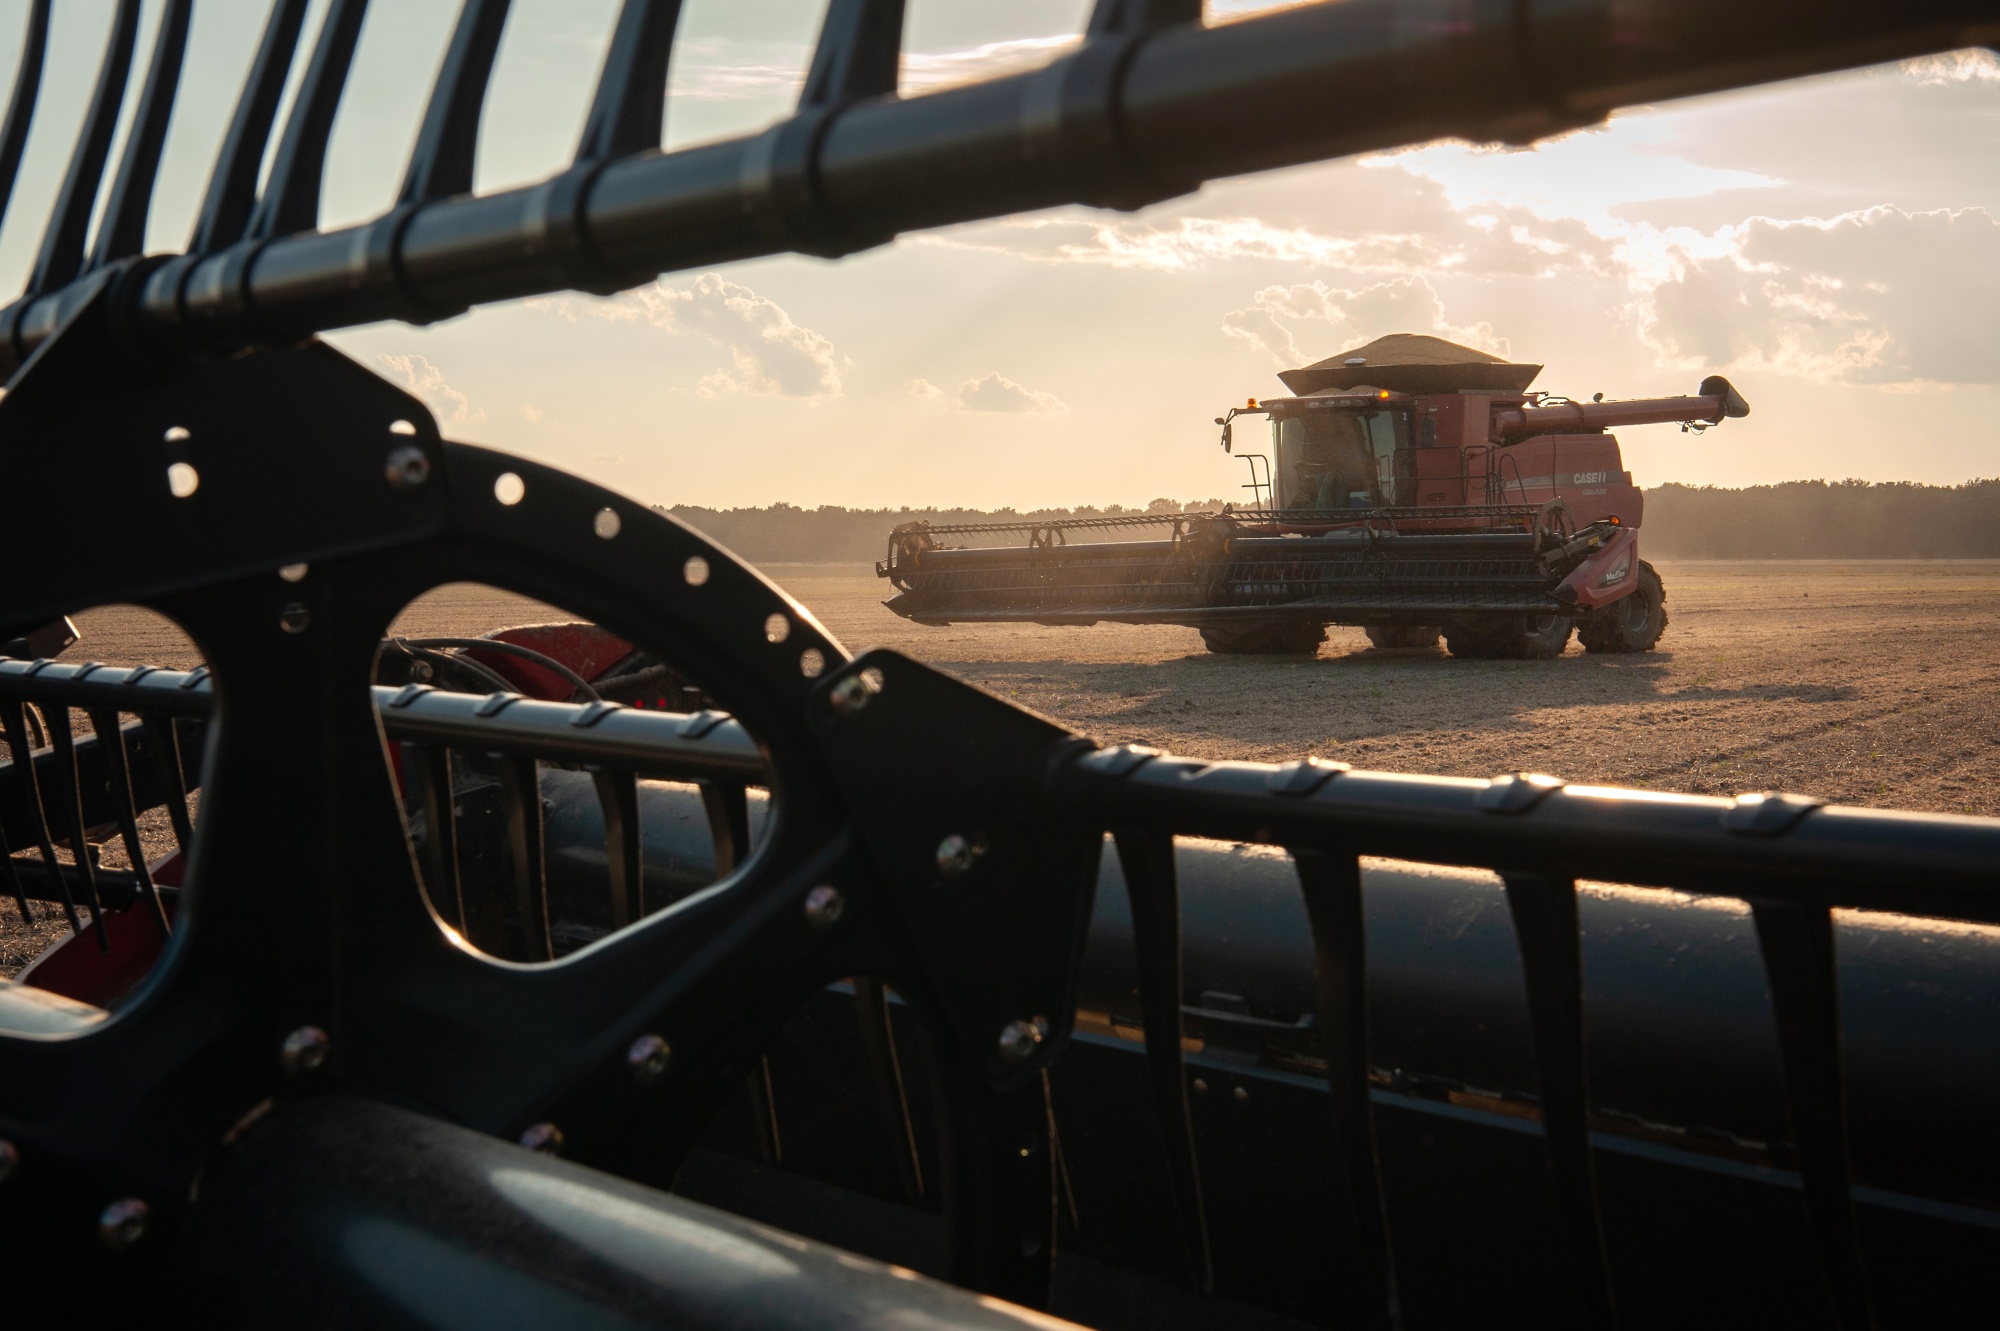 Workers harvest soybeans in Pace, Mississippi.